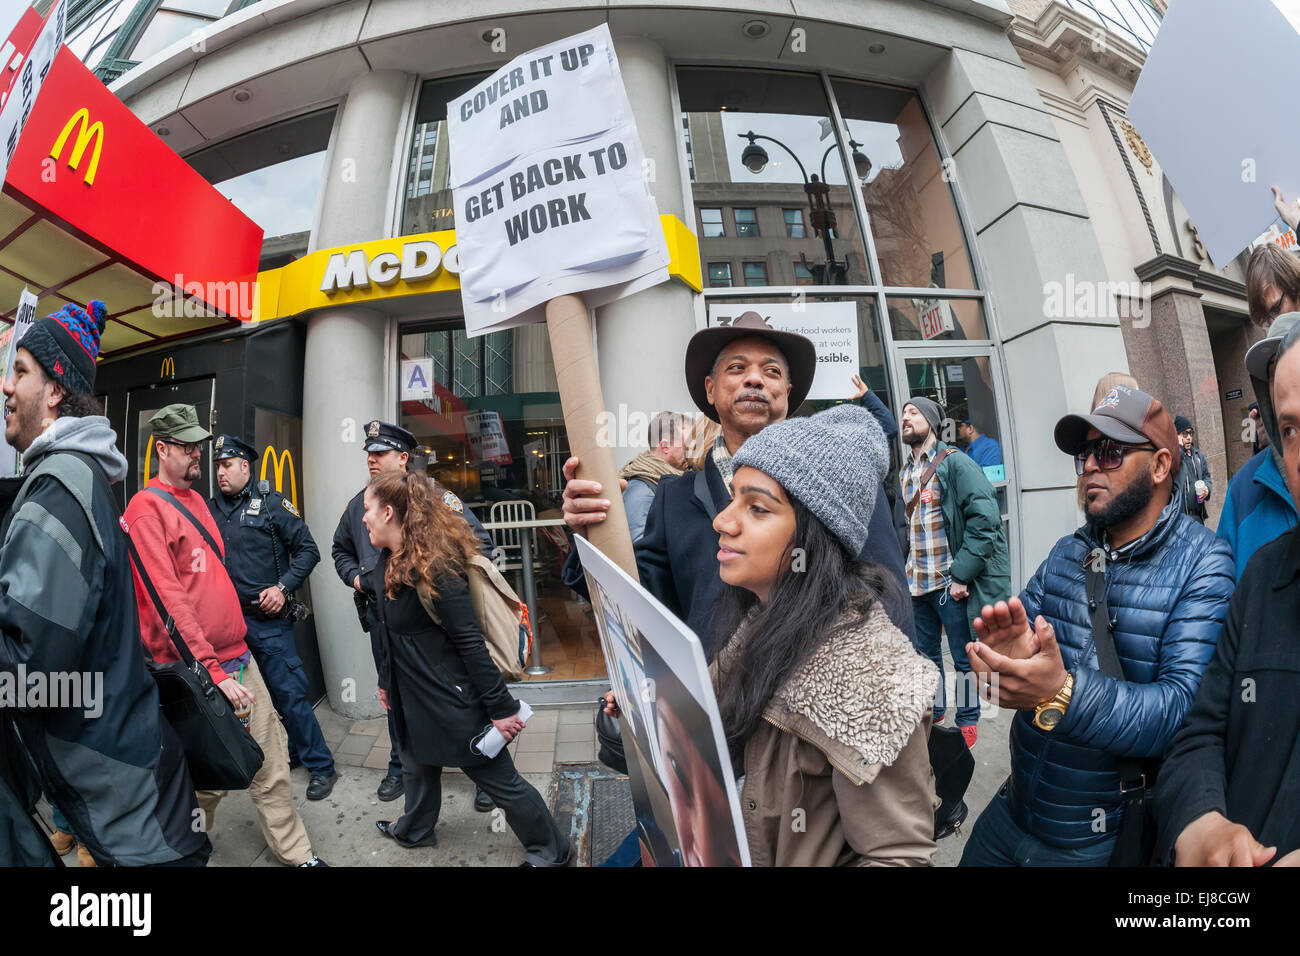 Workers at fast food restaurants and their supporters protest in front of a McDonald's restaurant in New York on Tuesday, March 17, 2015. Fast food workers have filed 28 OSHA complaints in 19 cities against the fast food chain. The workers allege that understaffing and the pressure to work fast creates hazardous working conditions leading to burns, cuts and other injuries.  (© Richard B. Levine) Stock Photo